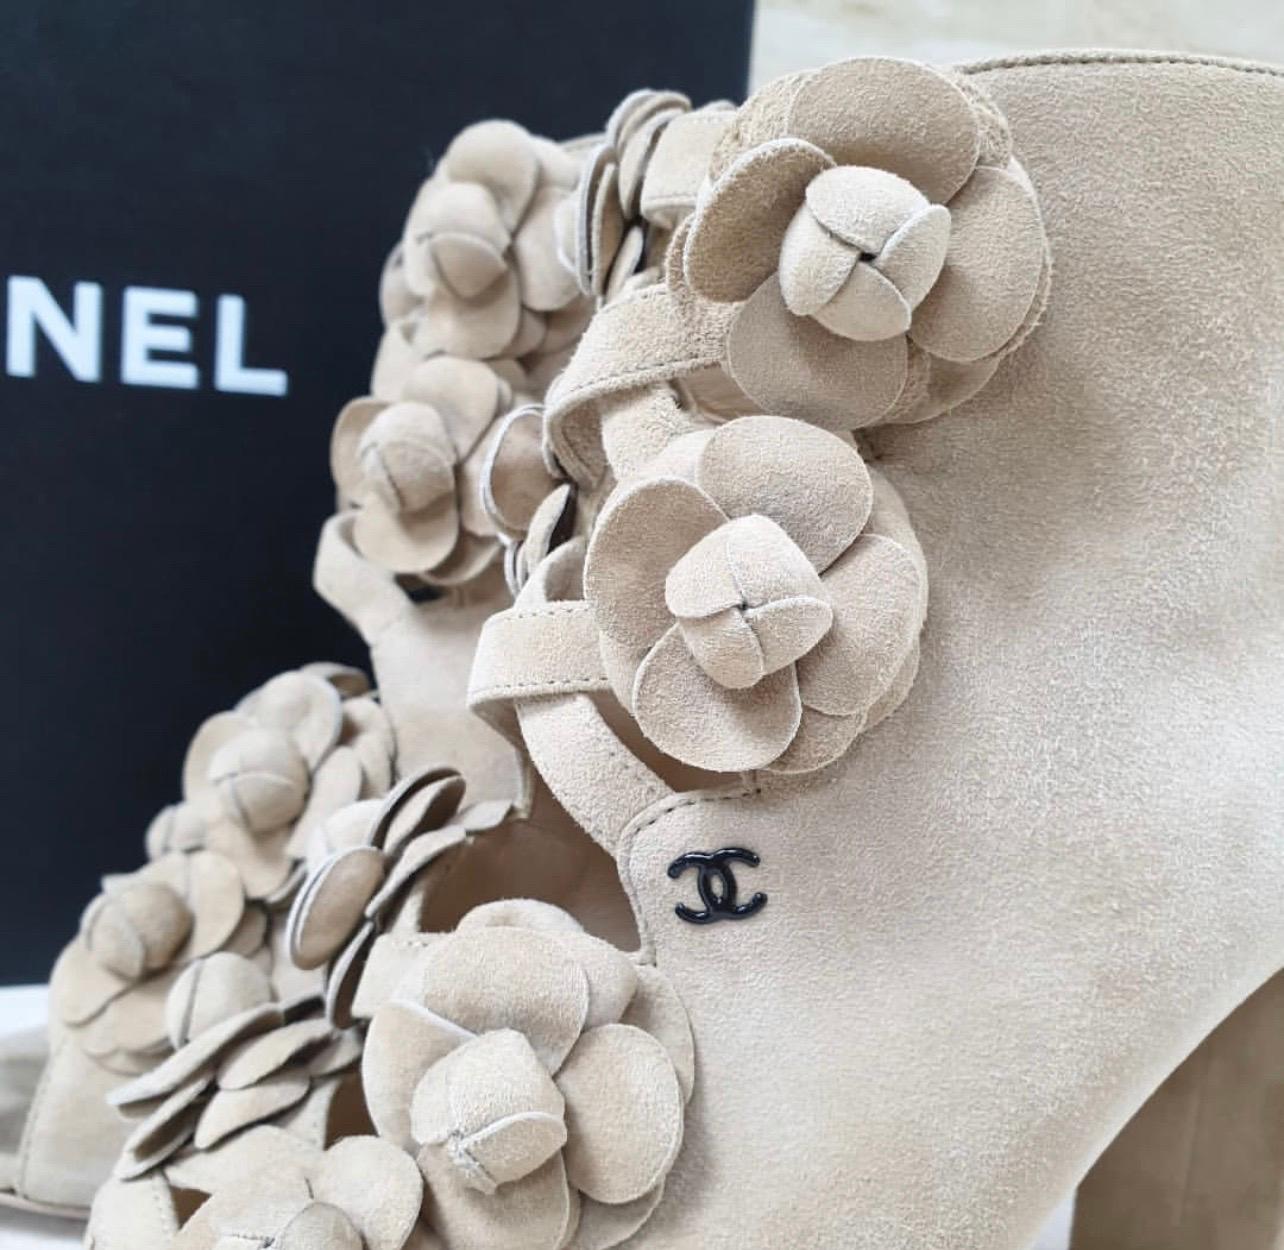 Beige suede ankle bootie features an open front with crisscross detail and open toe. 
Rows of camellia flowers on each side of the open front.
Tonal black CC logo. Heel measures 3.5